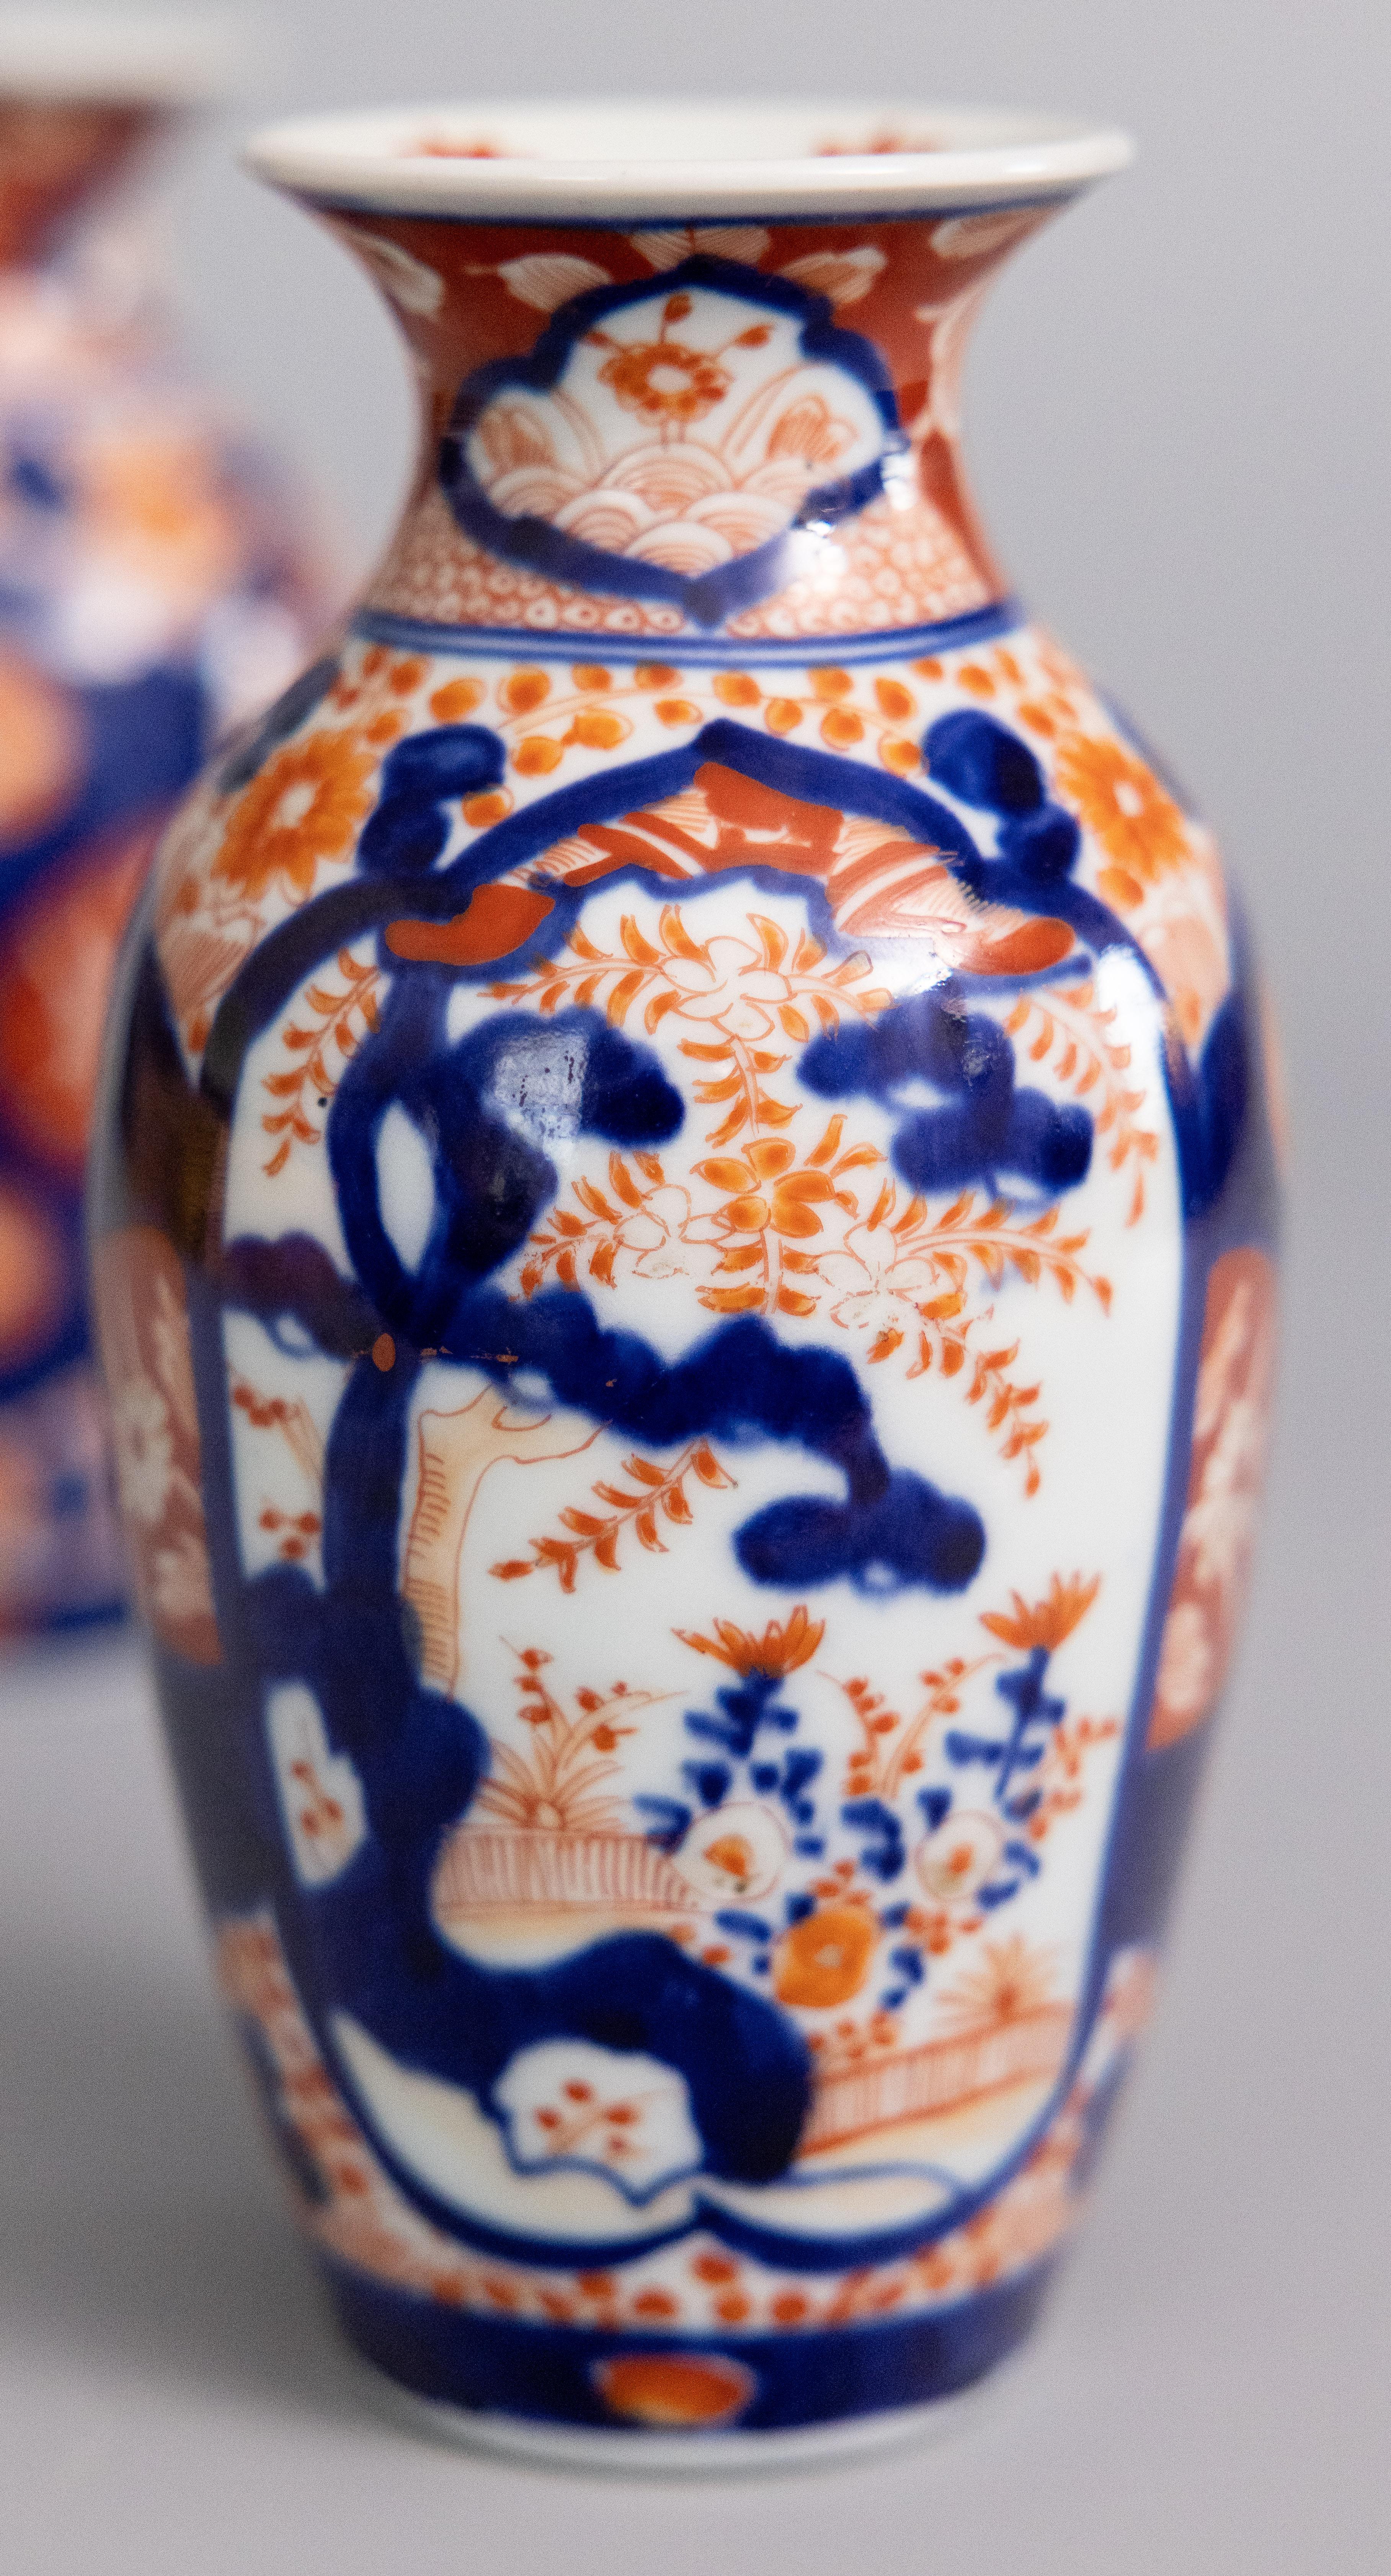 Antique 19th Century Japanese Imari Porcelain Vases - a Pair In Good Condition For Sale In Pearland, TX